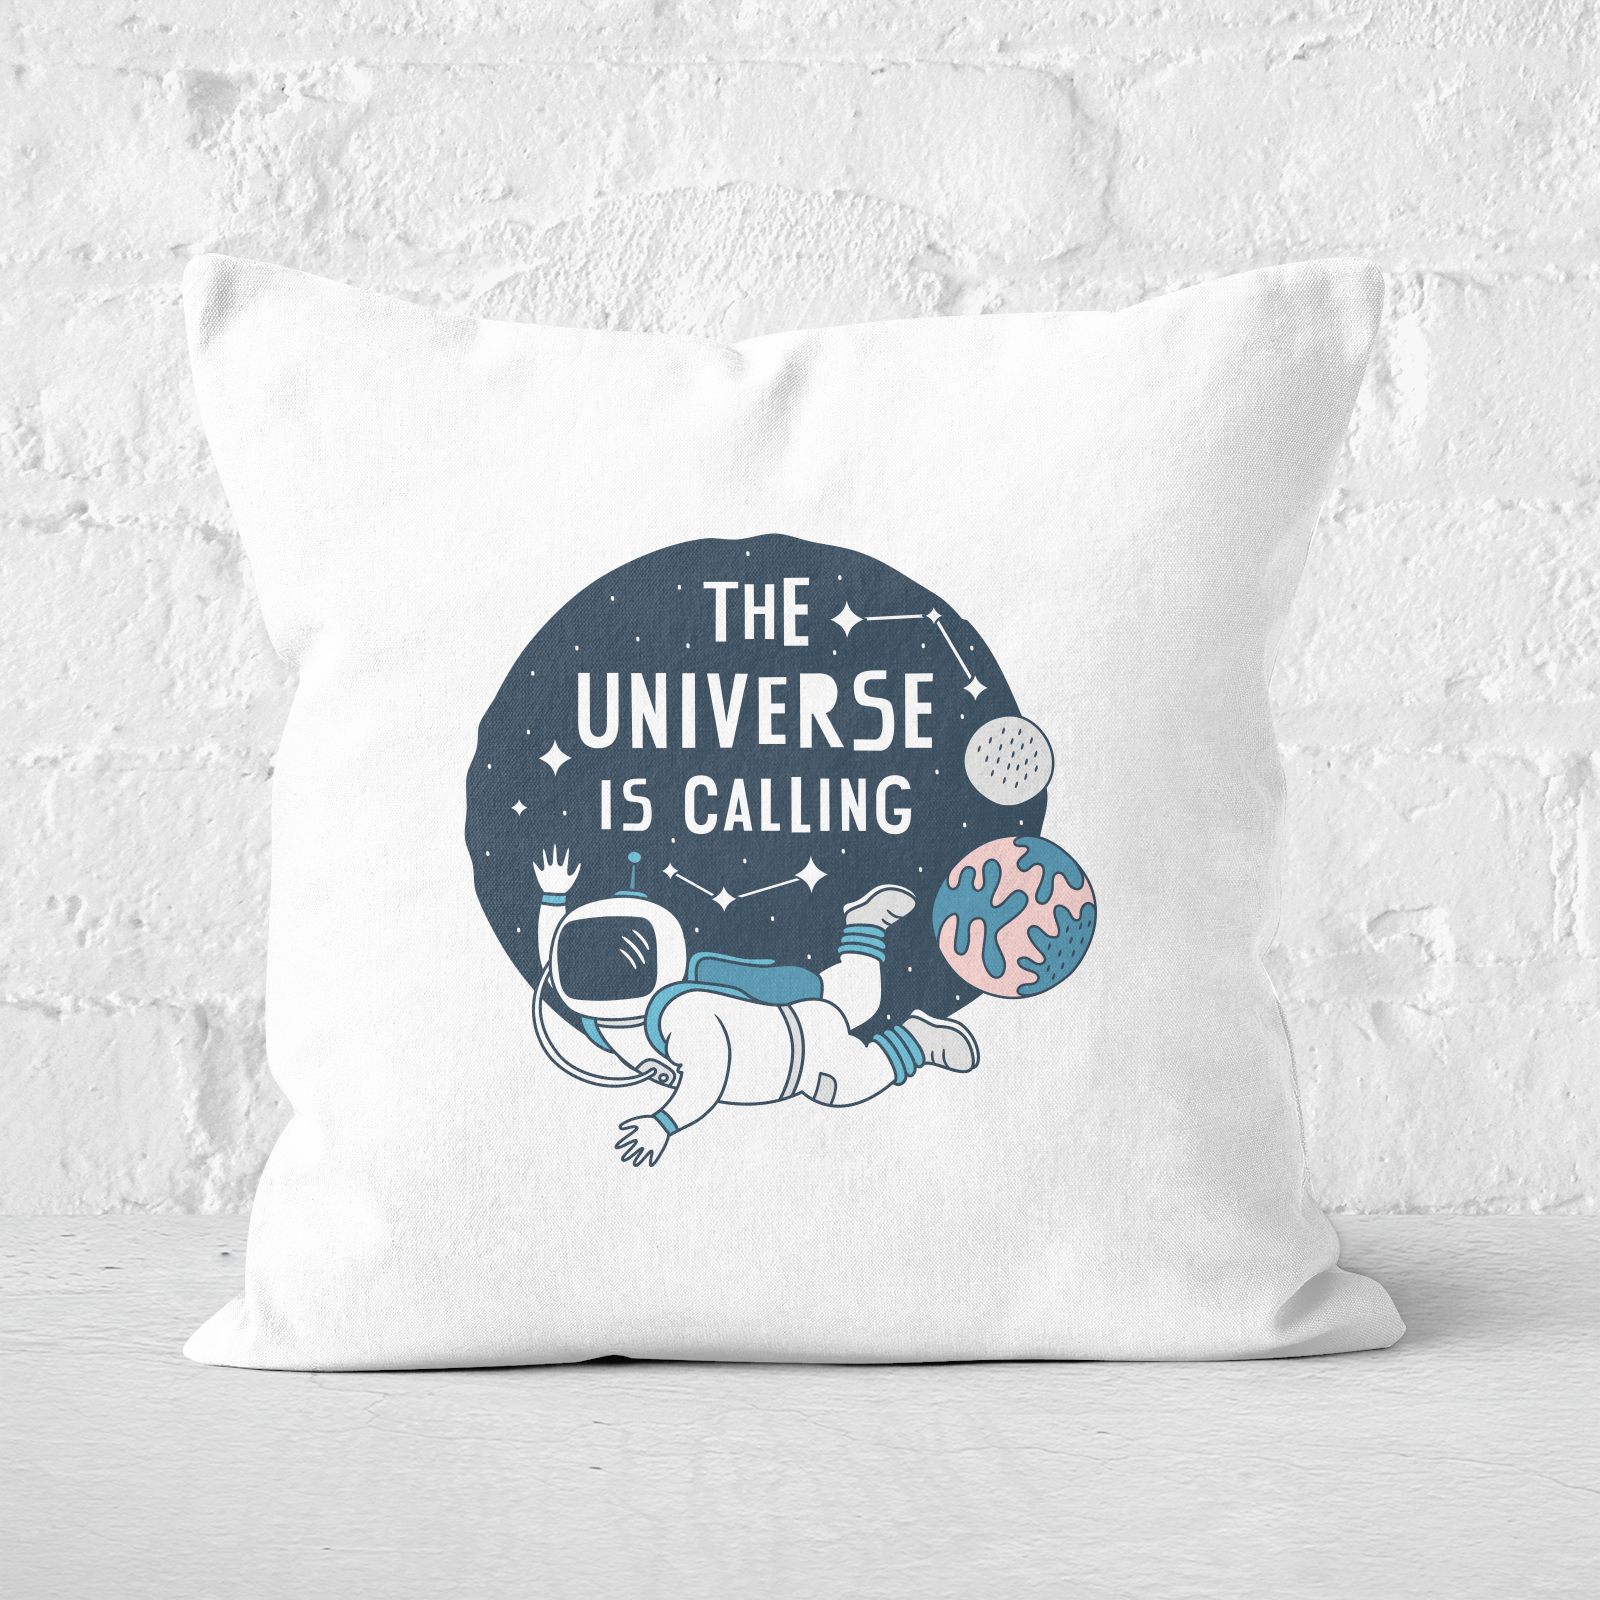 The Universe Is Calling Square Cushion - 60x60cm - Soft Touch